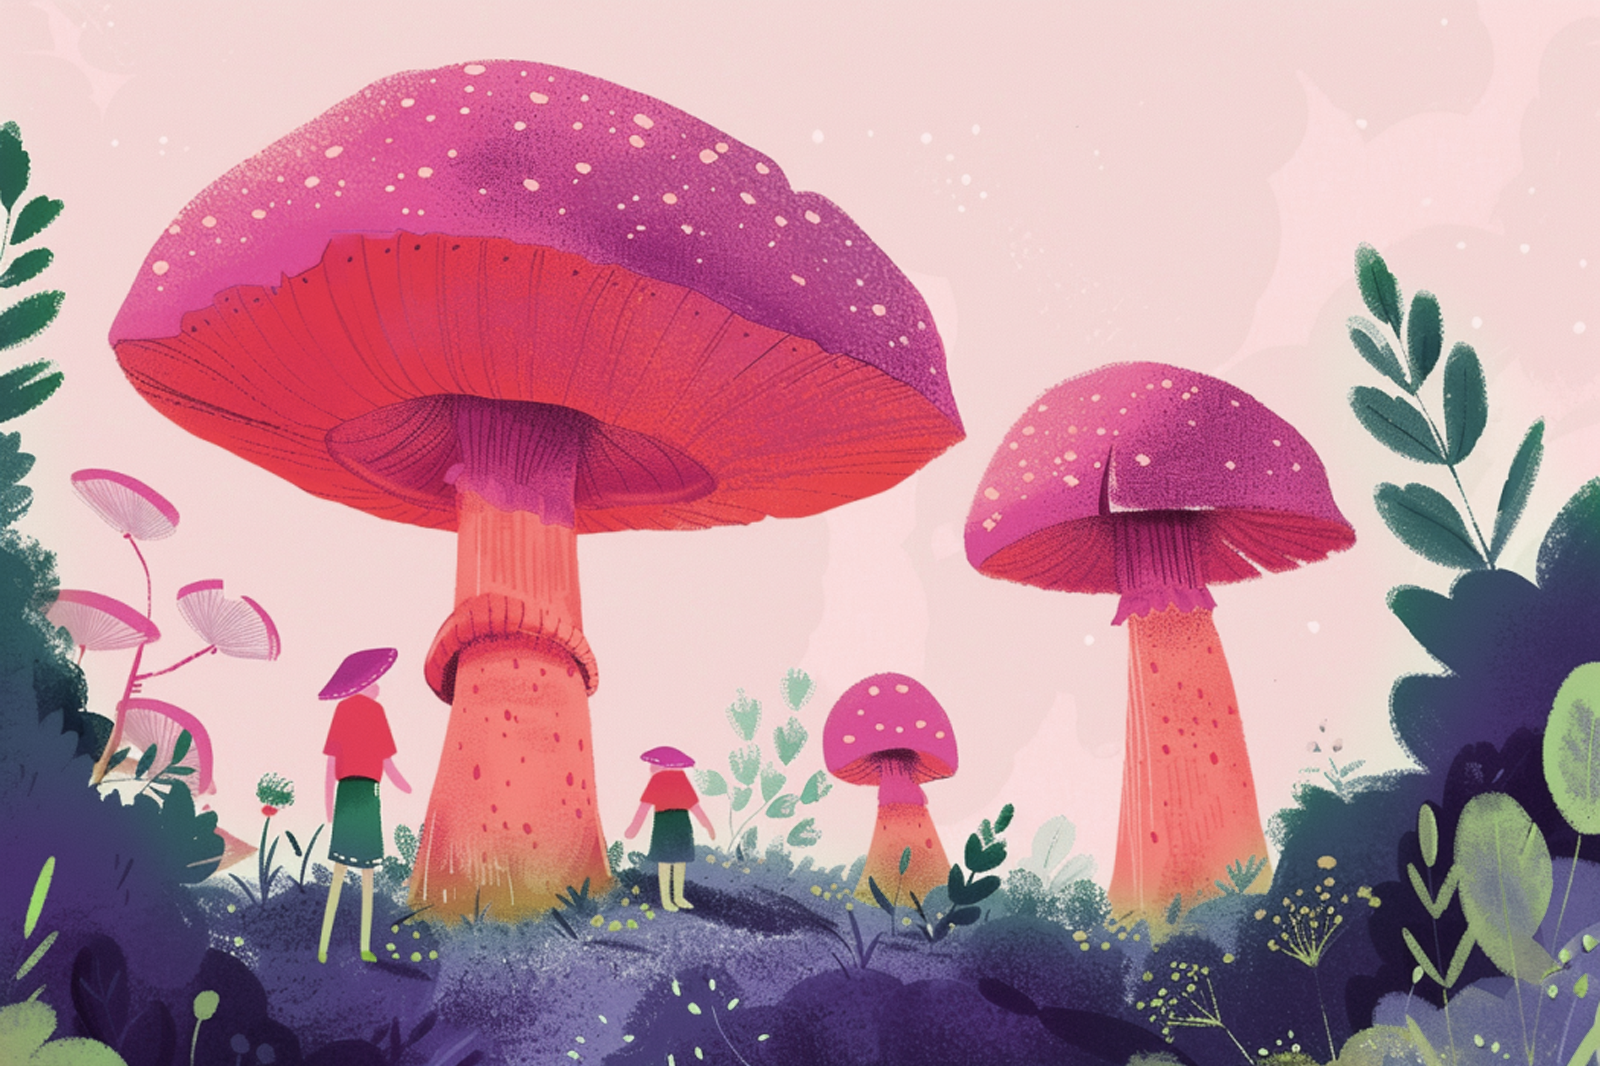 Two pink mushrooms amidst lush jungle, two women exploring